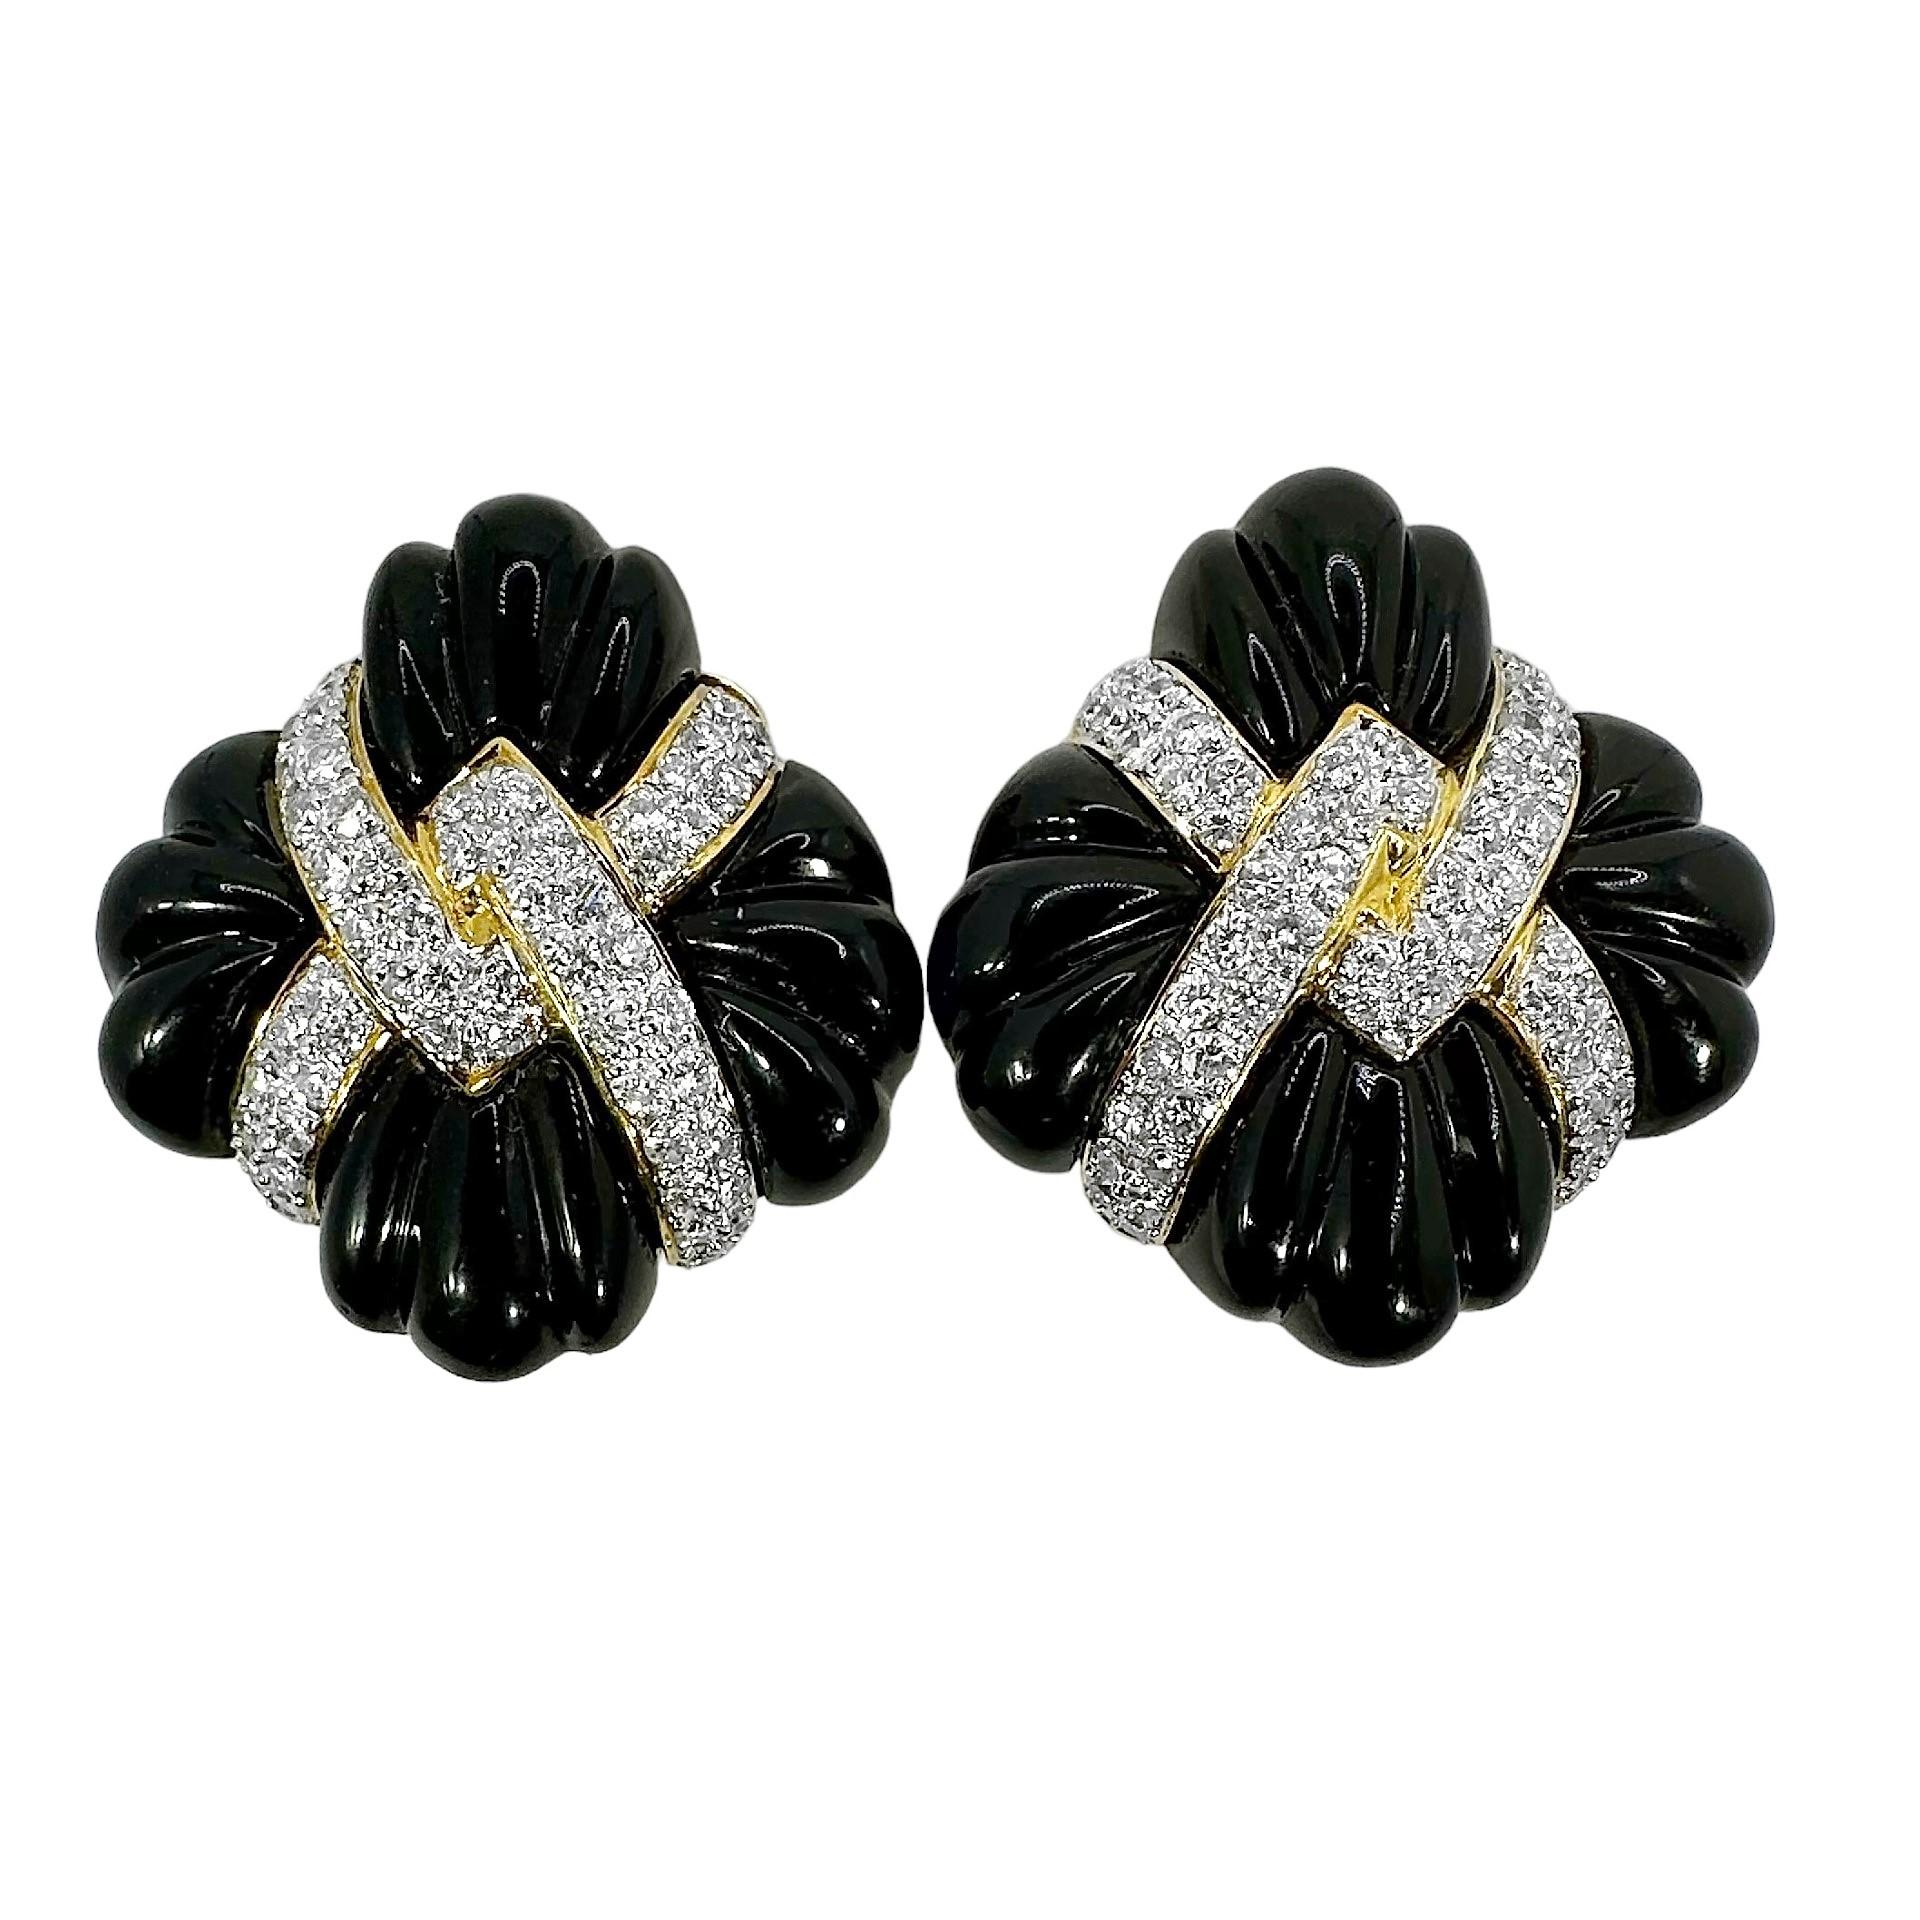 18k yellow gold frames with very high quality clip backs support hand cut, fluted black onyx which is crisscrossed with intertwined gold and diamond ribbons. The effect is very dramatic. This wonderful pair of 1970's fashion earrings bear all the